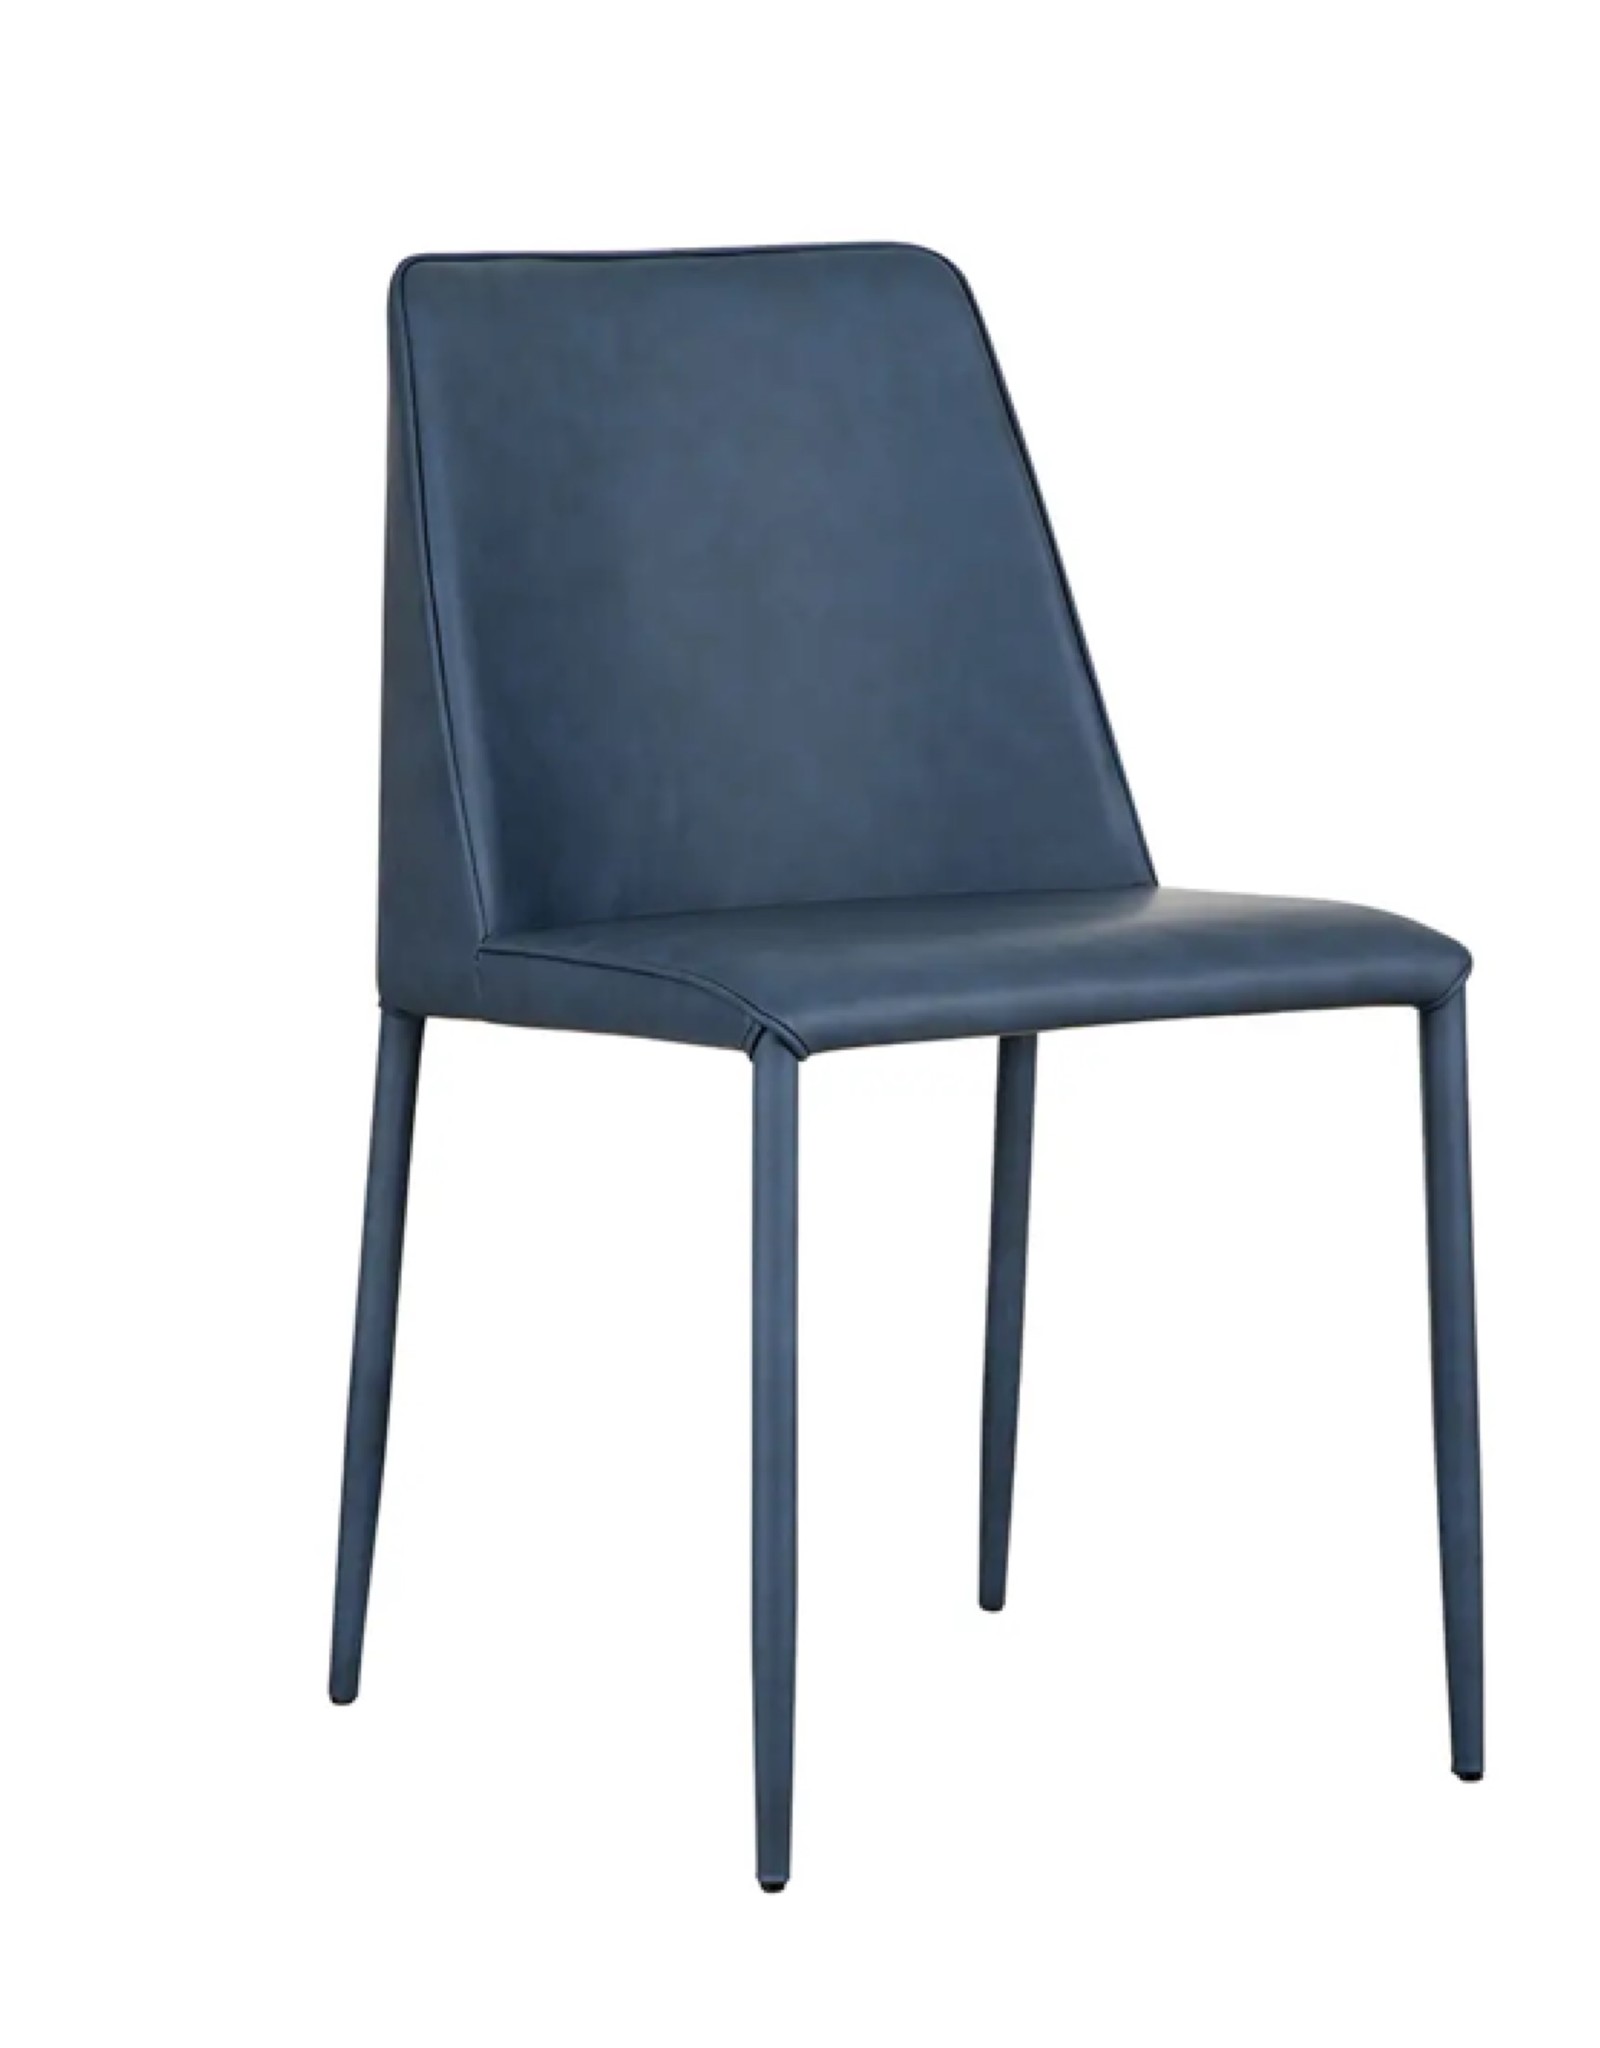 Moes Home Collection Moes Nora Dining Chair Ocean Cavern Grey Vegan Leather-M2 YM-1004-41